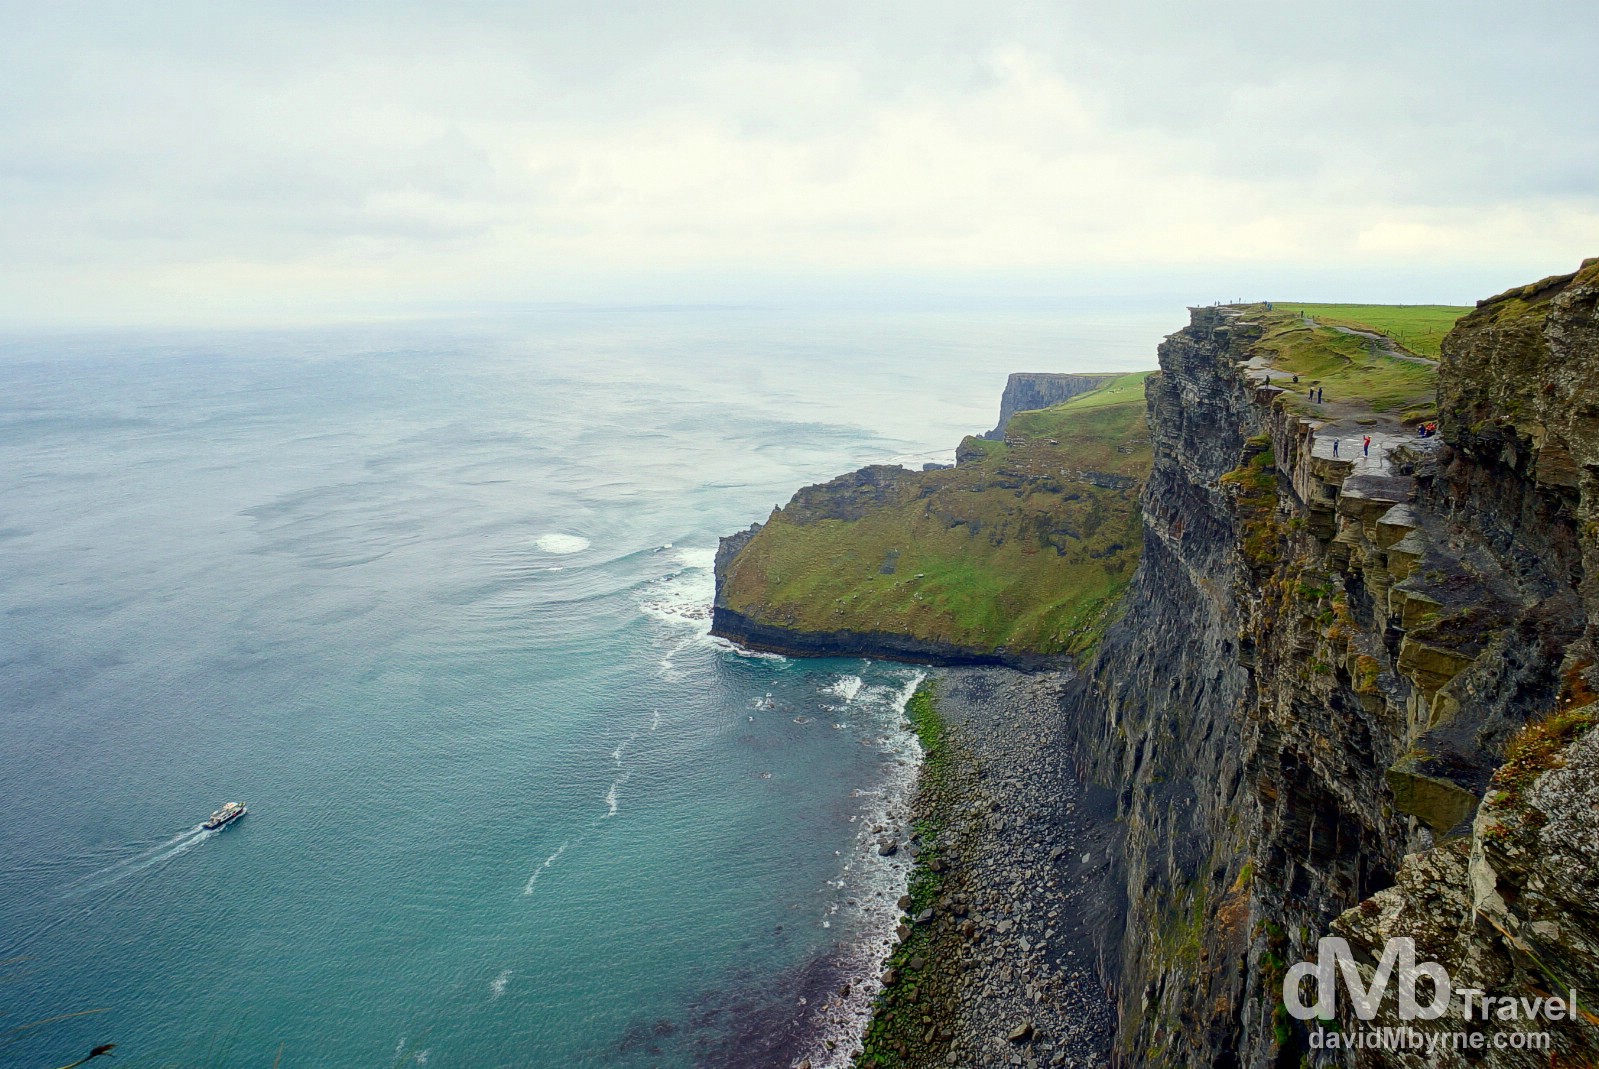 A section of the coastline as seen from the Cliffs of Moher Walking trail, Co. Clare, Ireland. August 27, 2014.